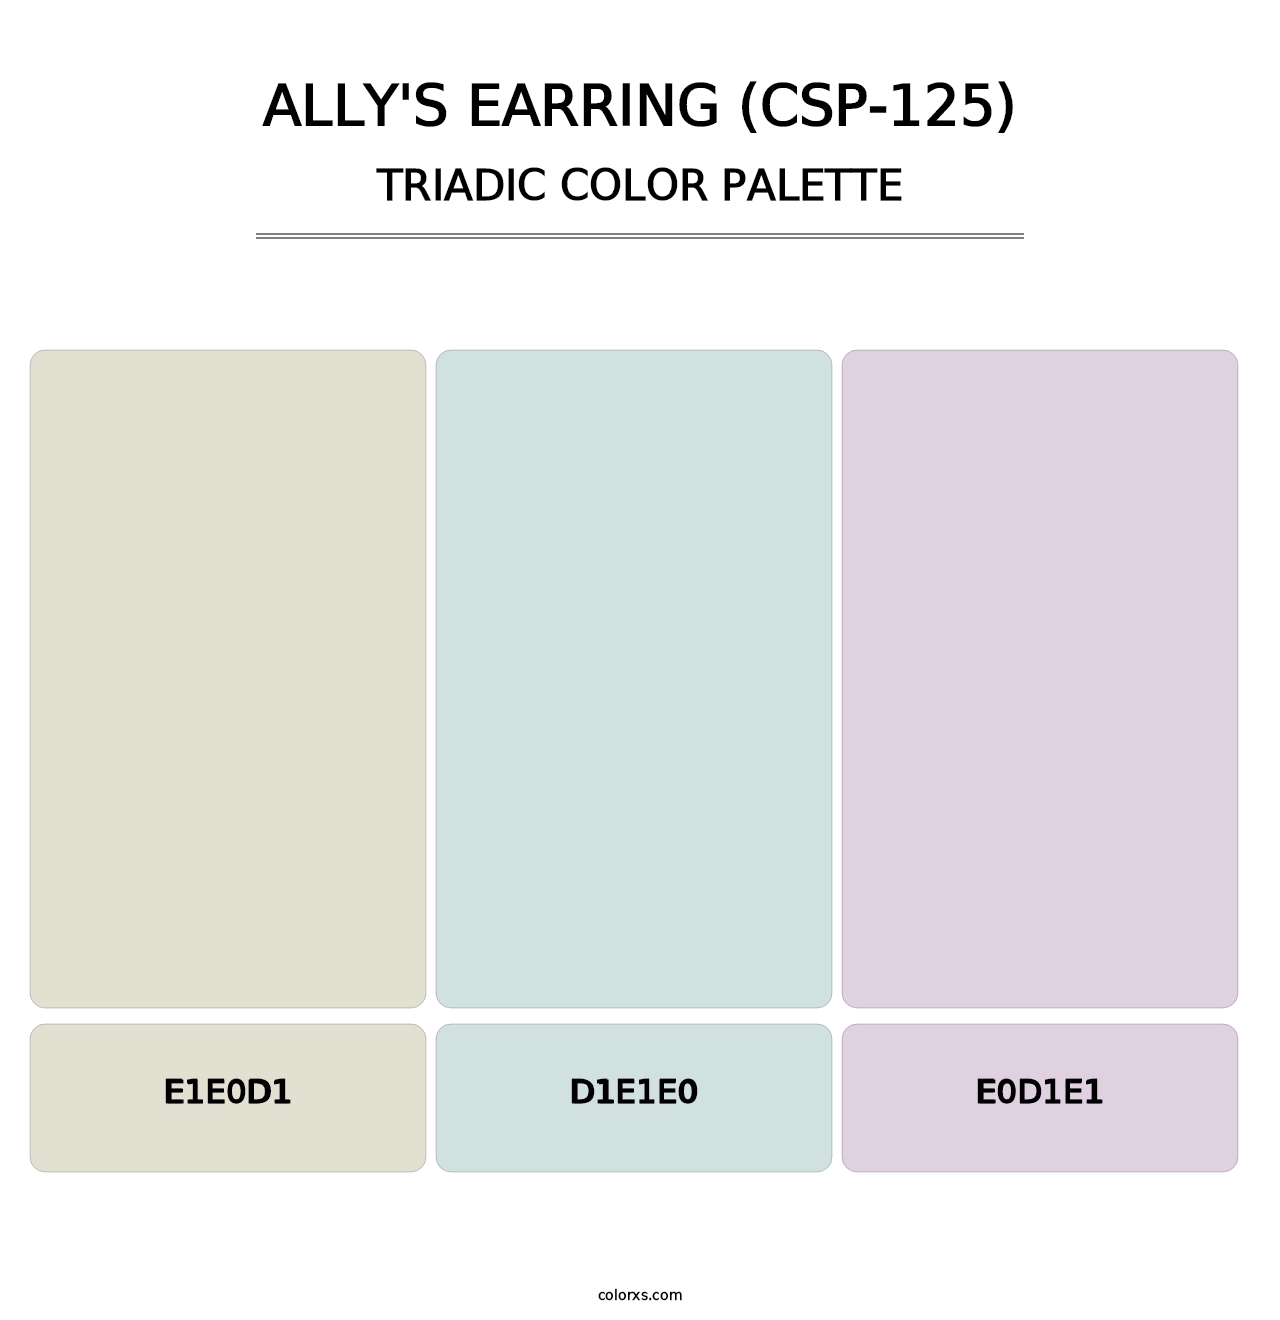 Ally's Earring (CSP-125) - Triadic Color Palette